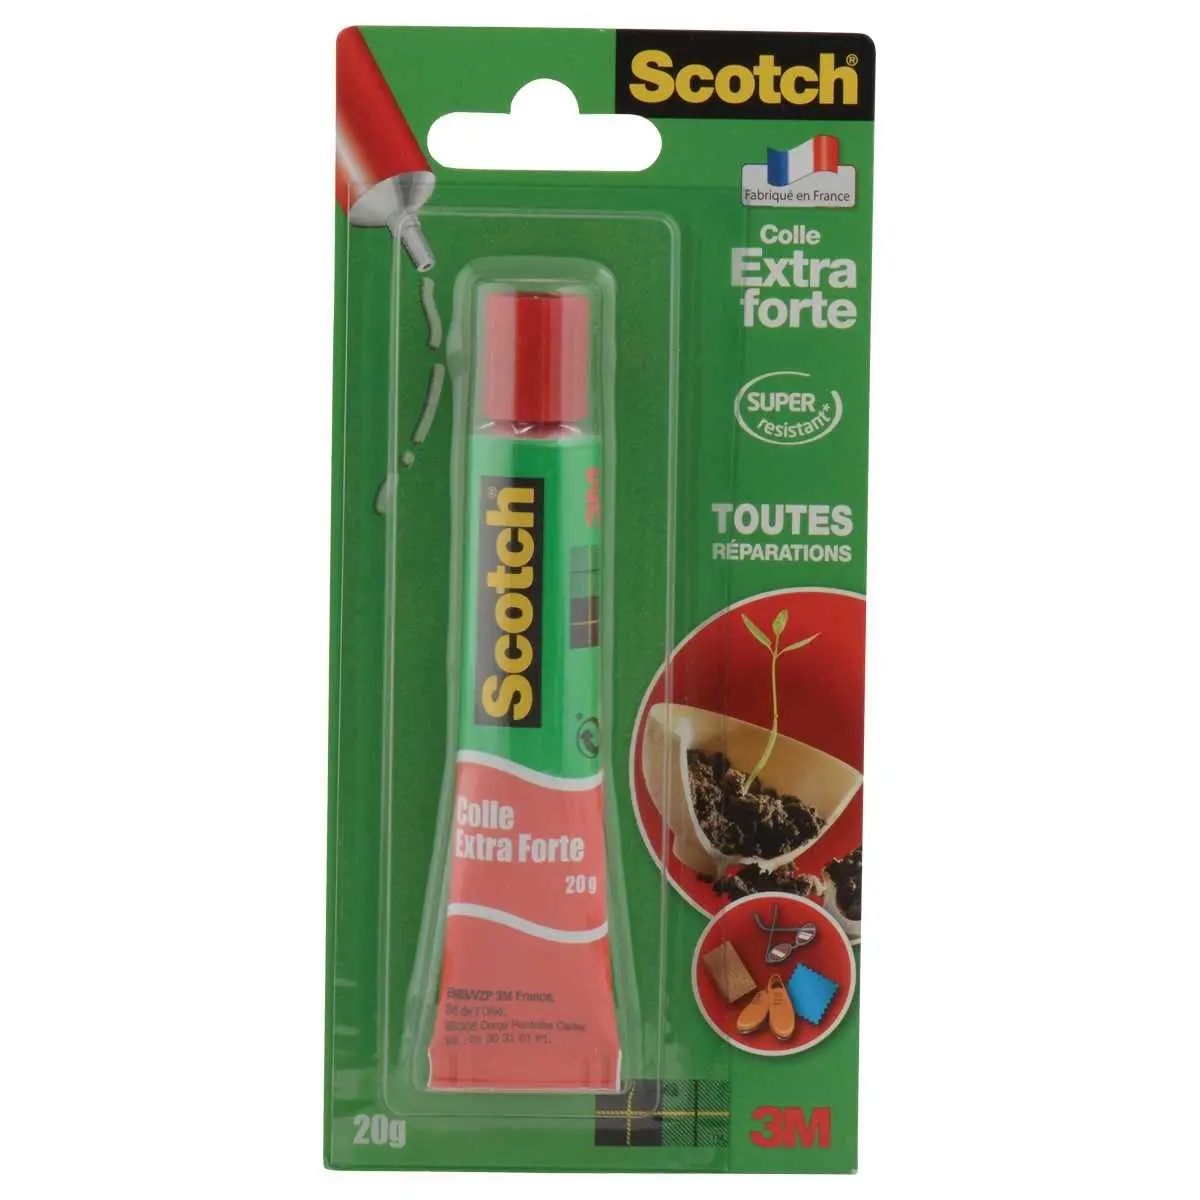 Scotch Colle Extra Forte